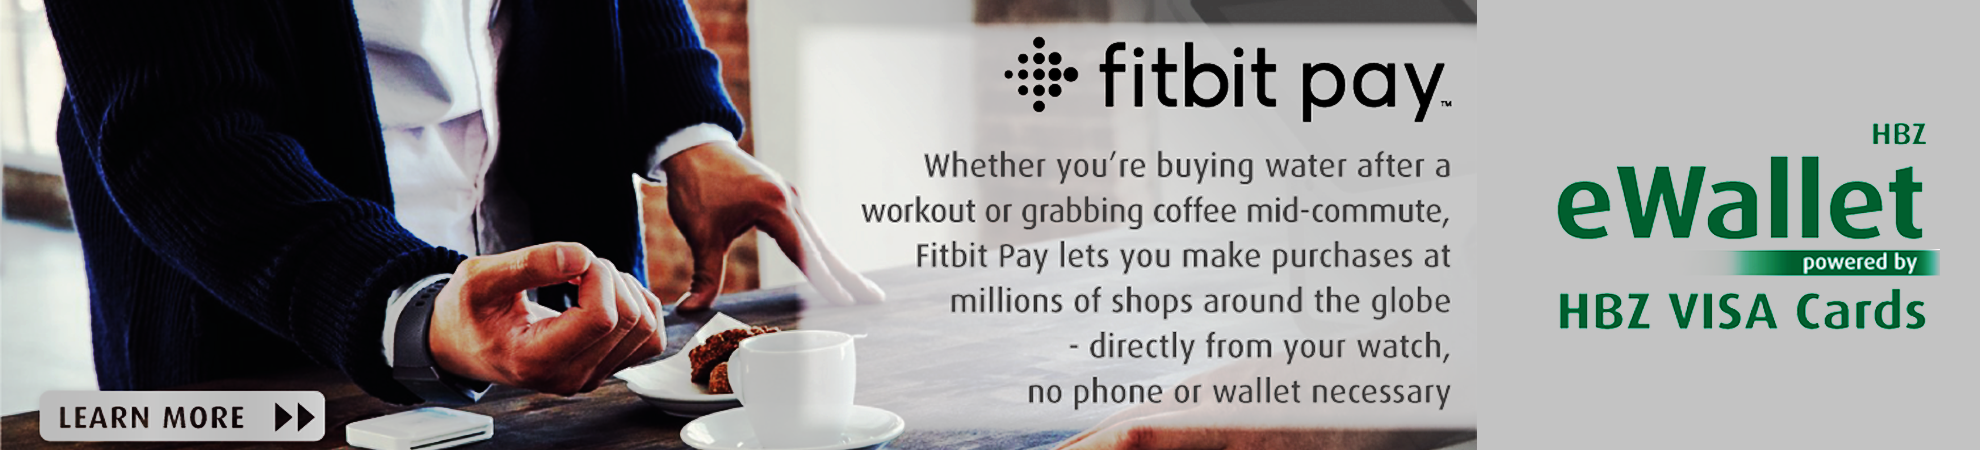 FitBit Pay 02